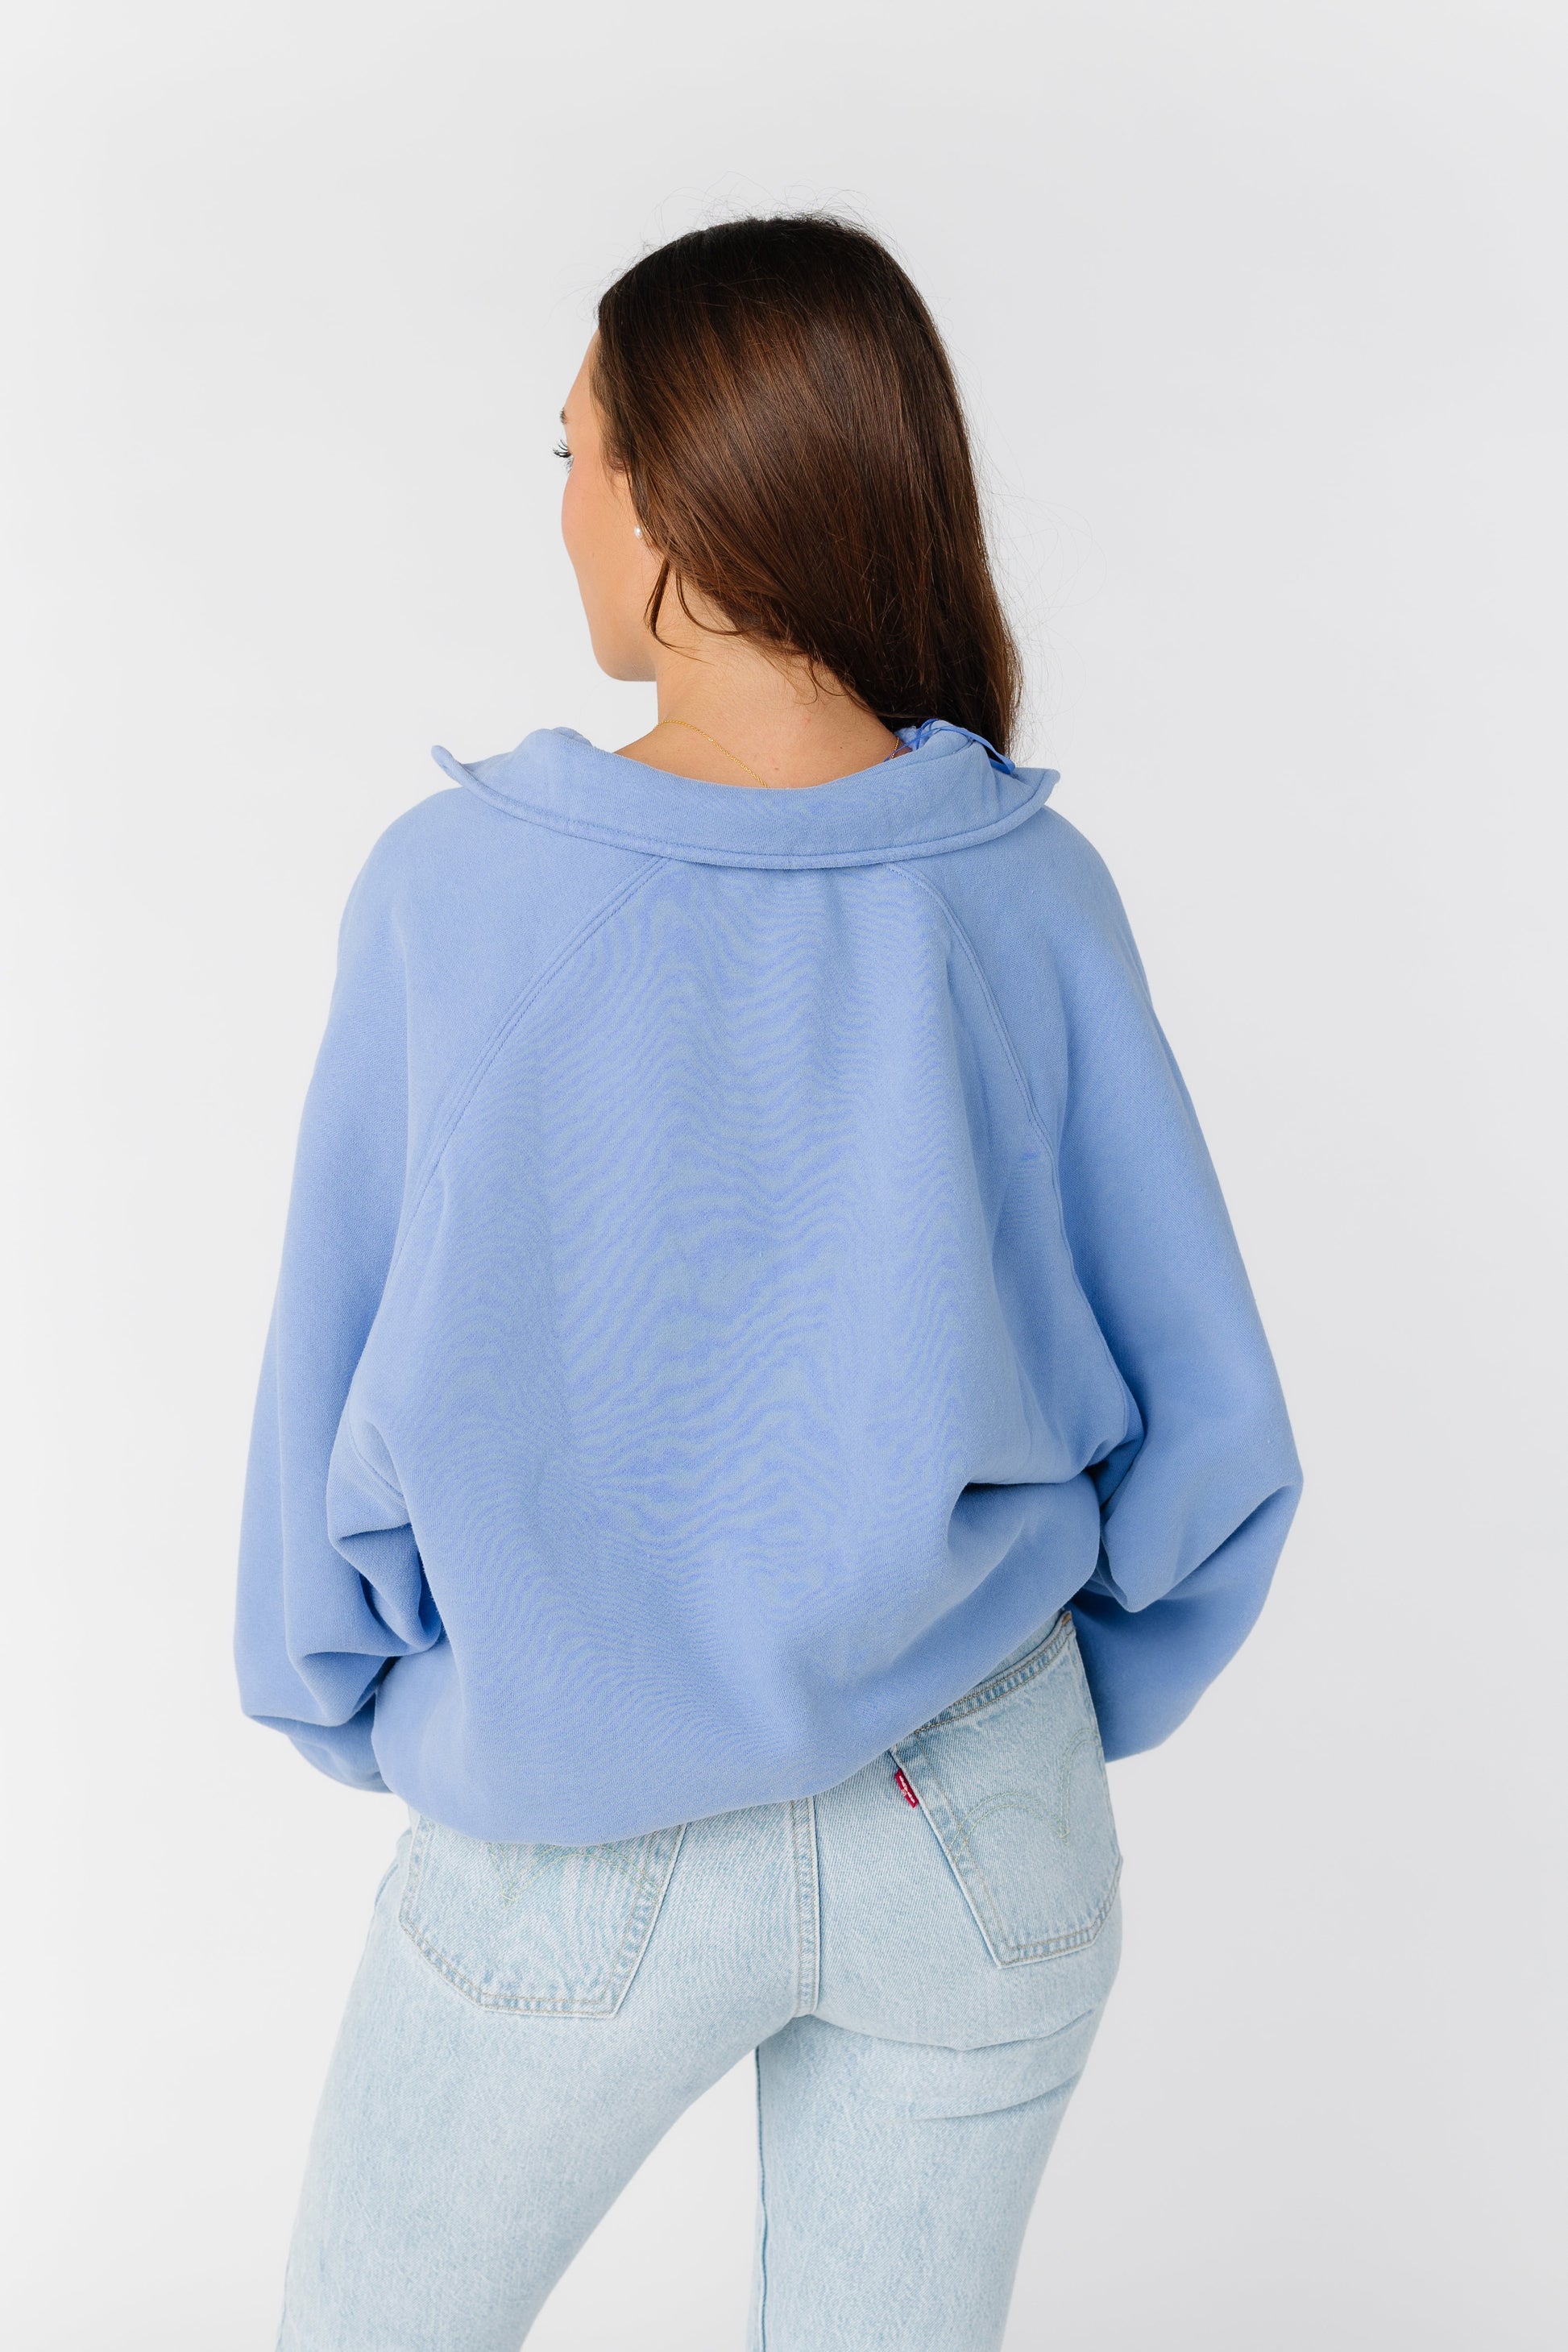 Moon Collared Sweater - New WOMEN'S SWEATERS Paper Moon 